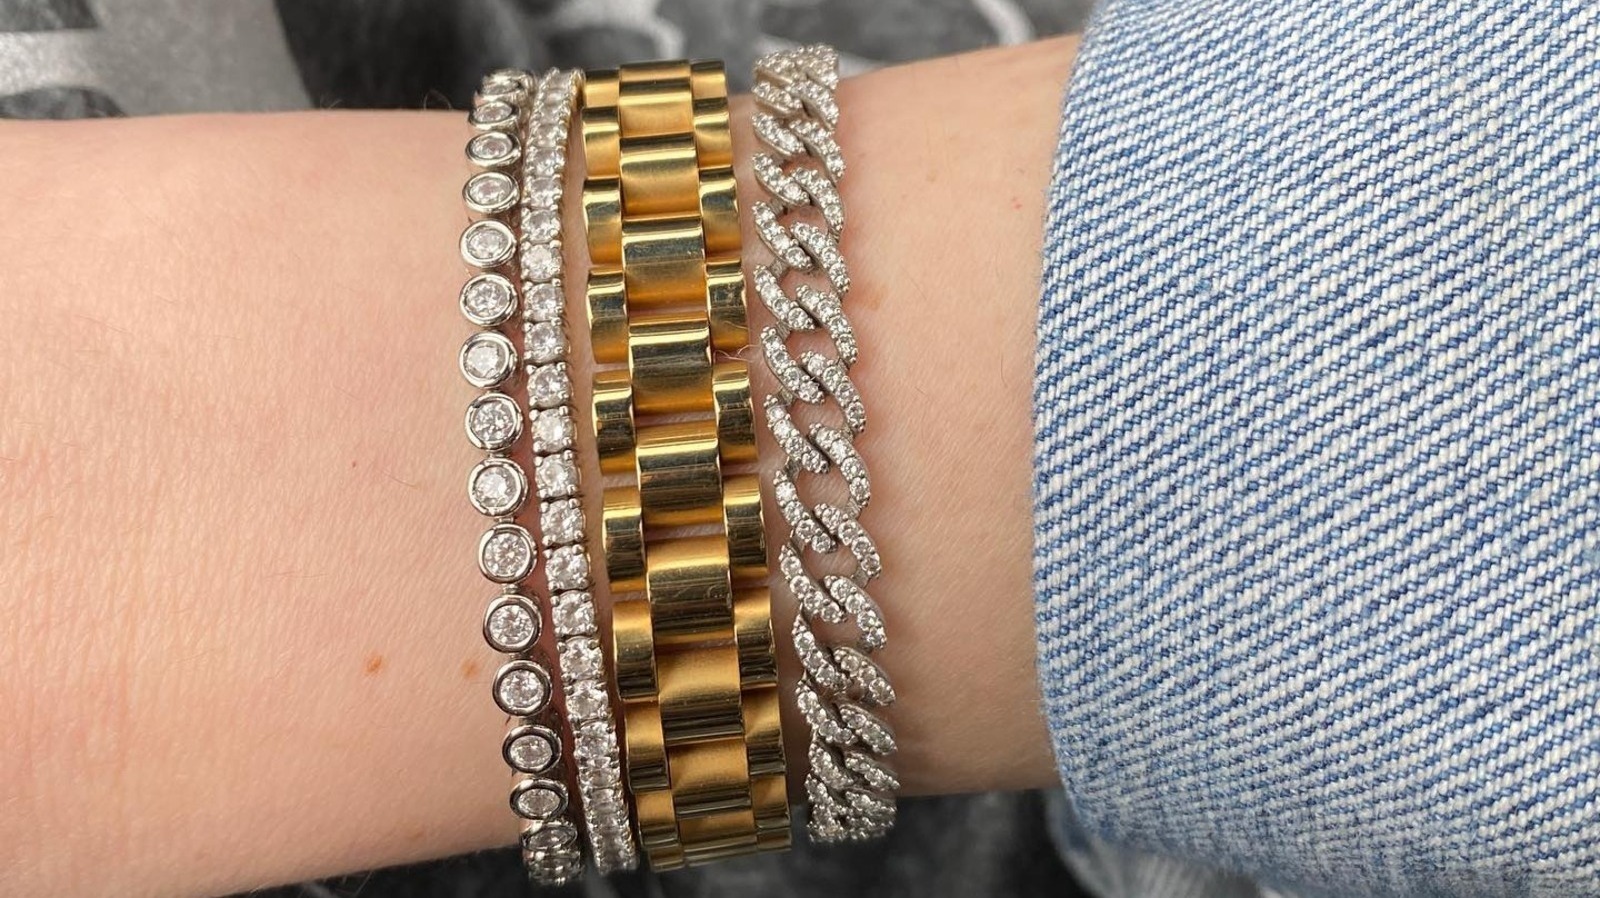 https://www.glam.com/img/gallery/tennis-bracelets-are-the-retro-statement-jewelry-trend-making-a-comeback/l-intro-1684343858.jpg